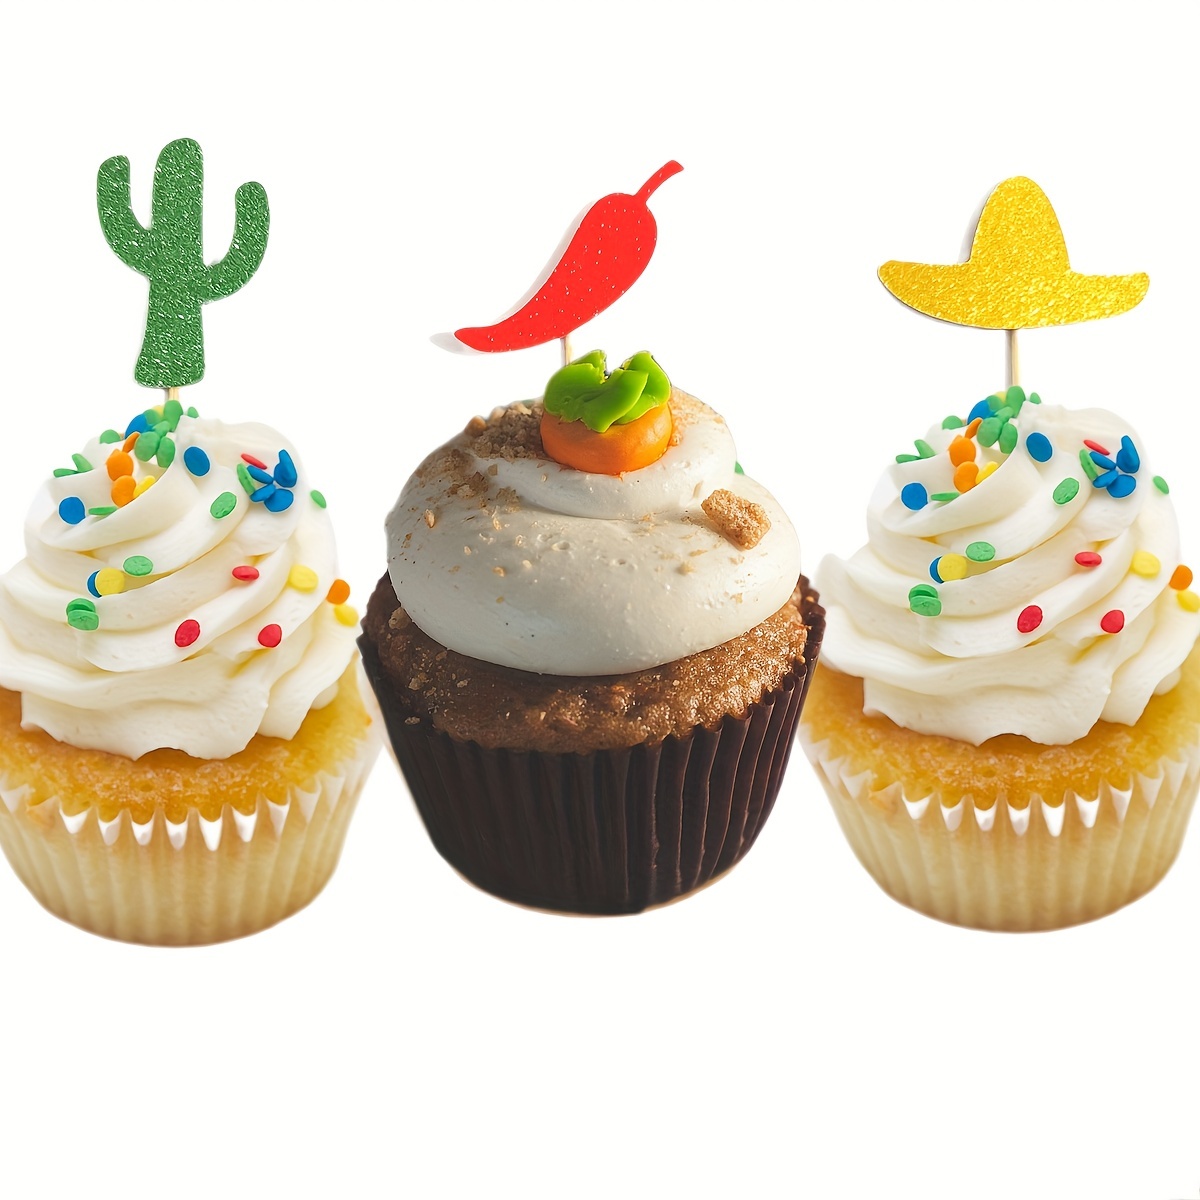 10 Pcs Cake Toppers Mexican Themed Straw Hat Chili Cactus Shaped